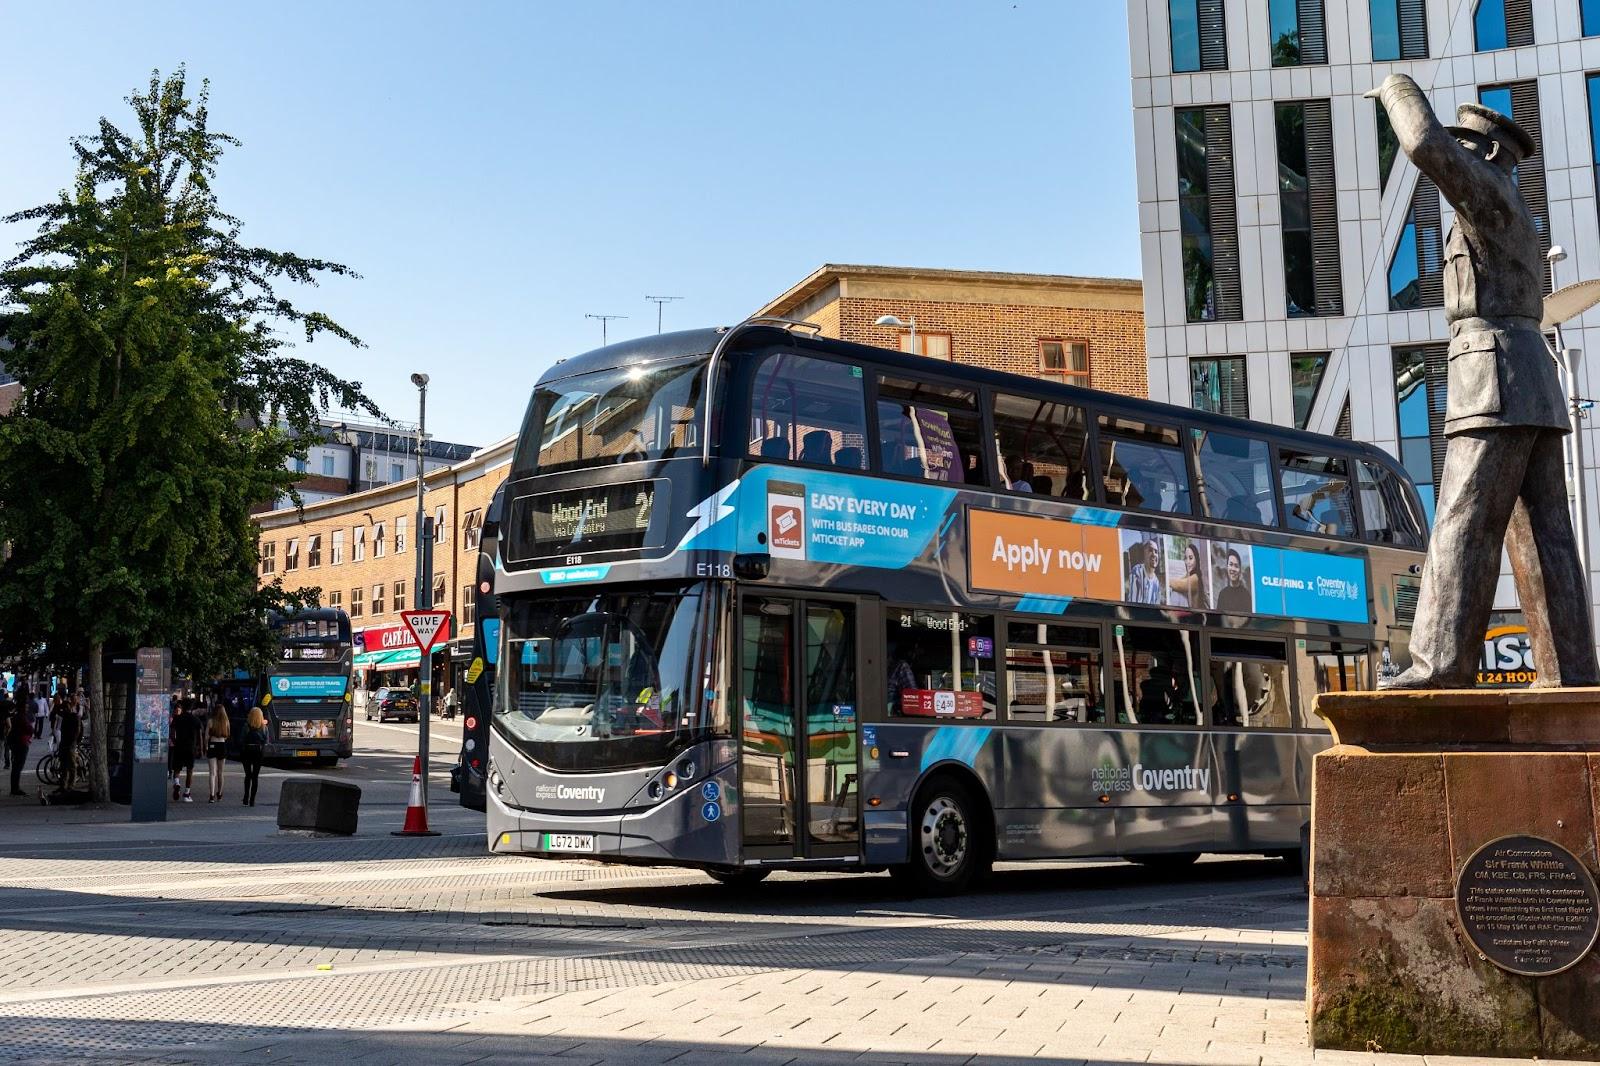 Upcoming changes to National Express Coventry bus services